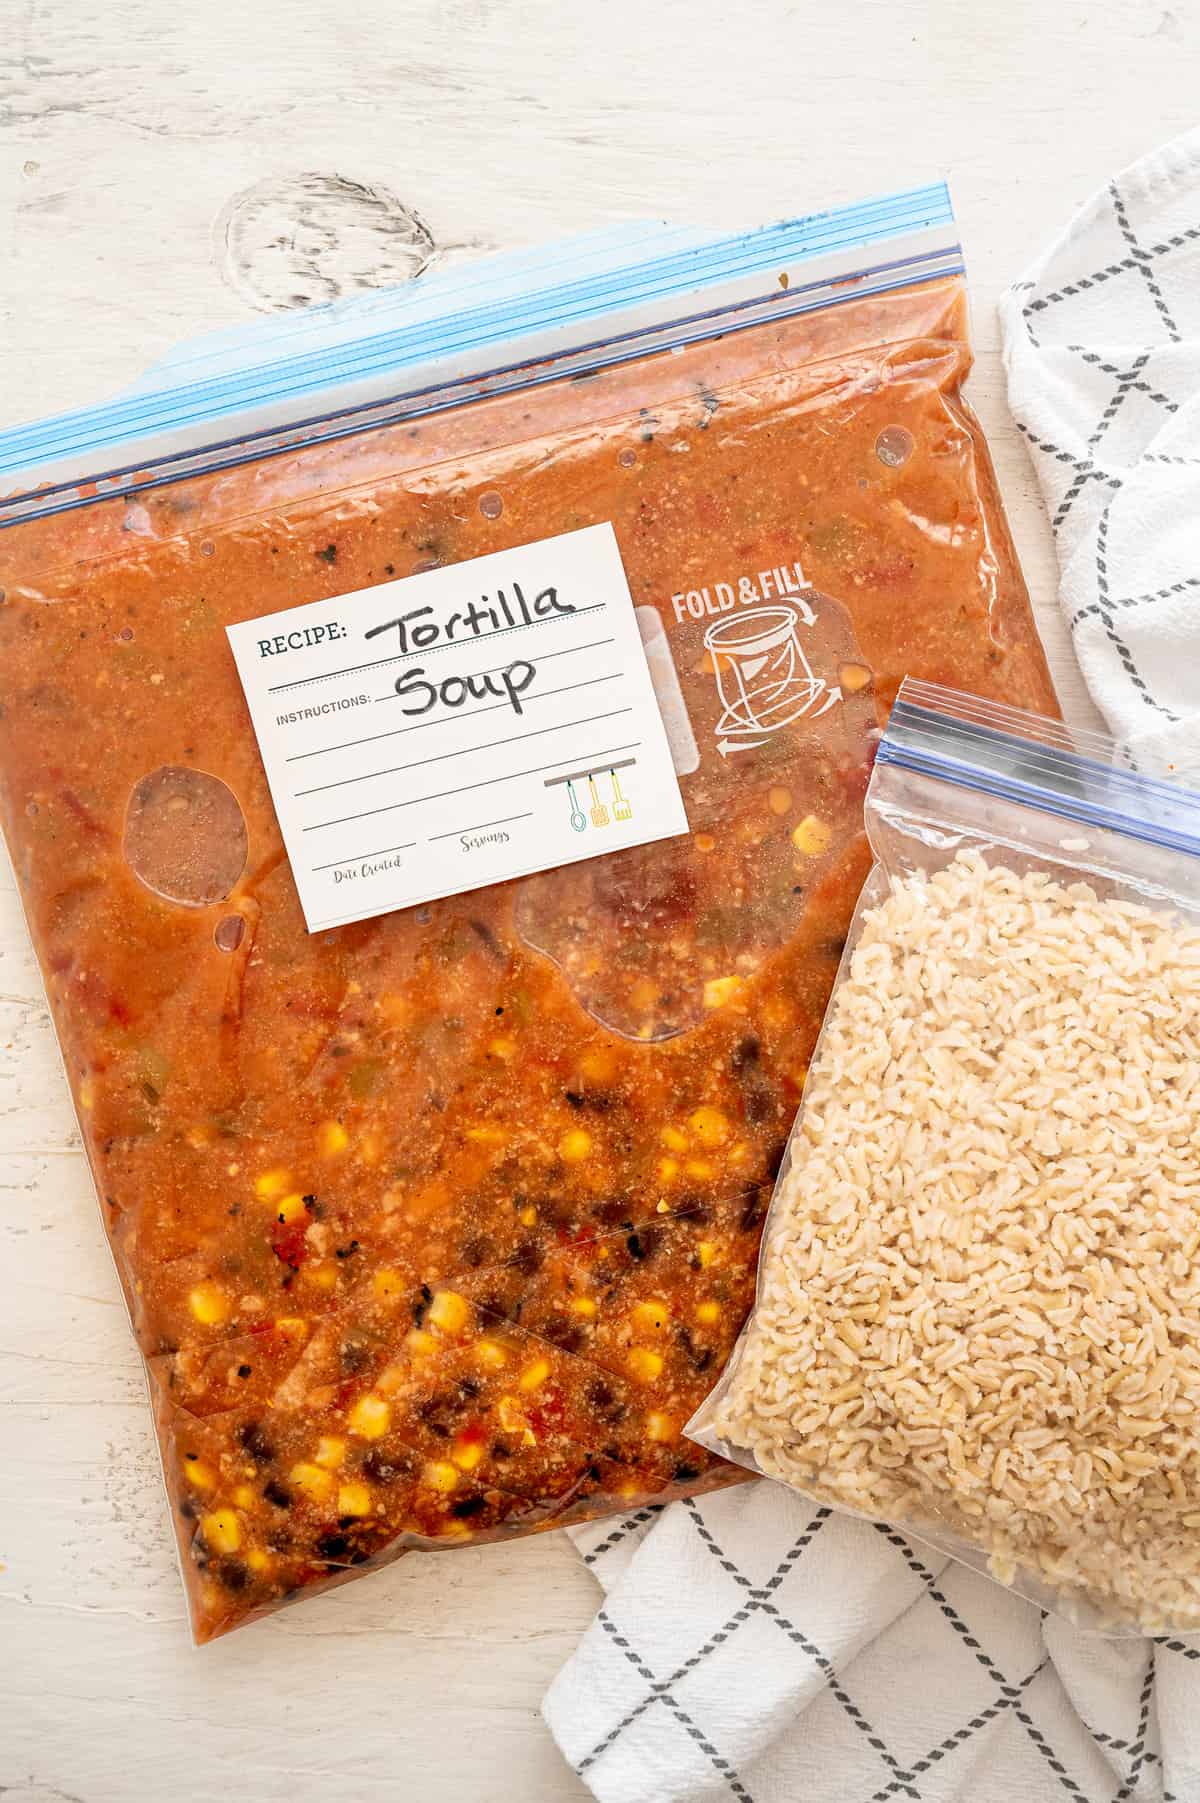 A gallon-sized freezer bag of soup labeled Tortilla Soup and a quart-size freezer bag of cooked rice next to it.